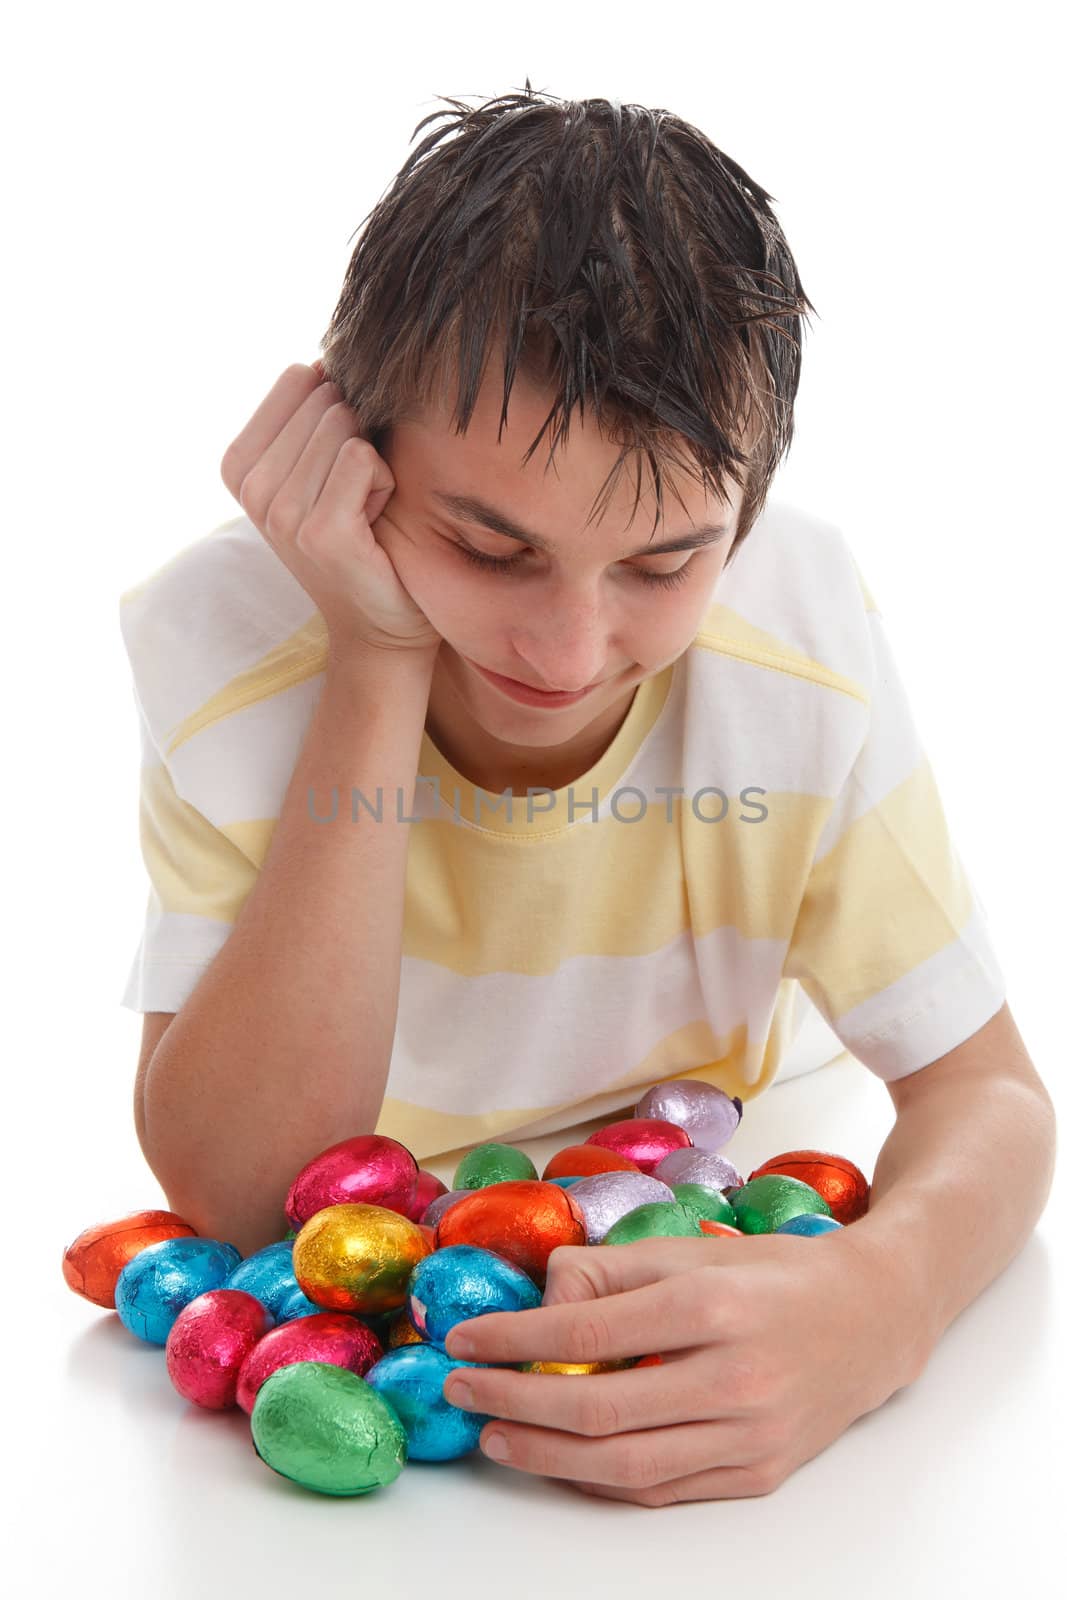 A boy looking down at lots of colourful bright chocolate easter eggs.